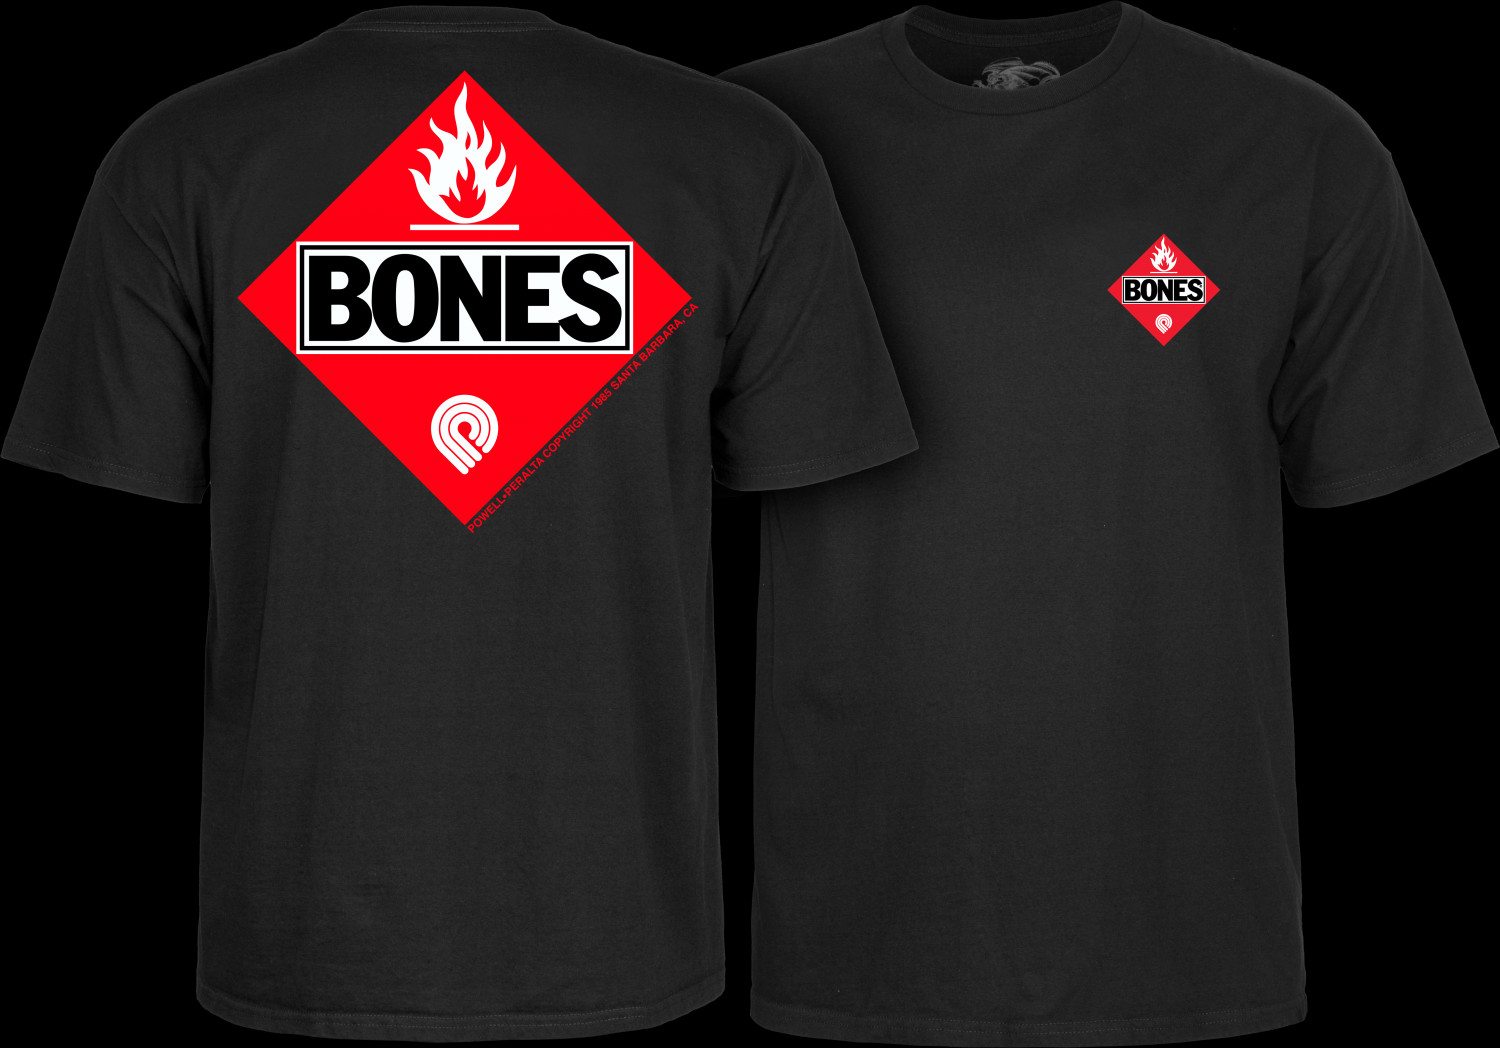 Powell Peralta Flamable Black T-shirt Photo #1 - Photo Gallery - Powell ...